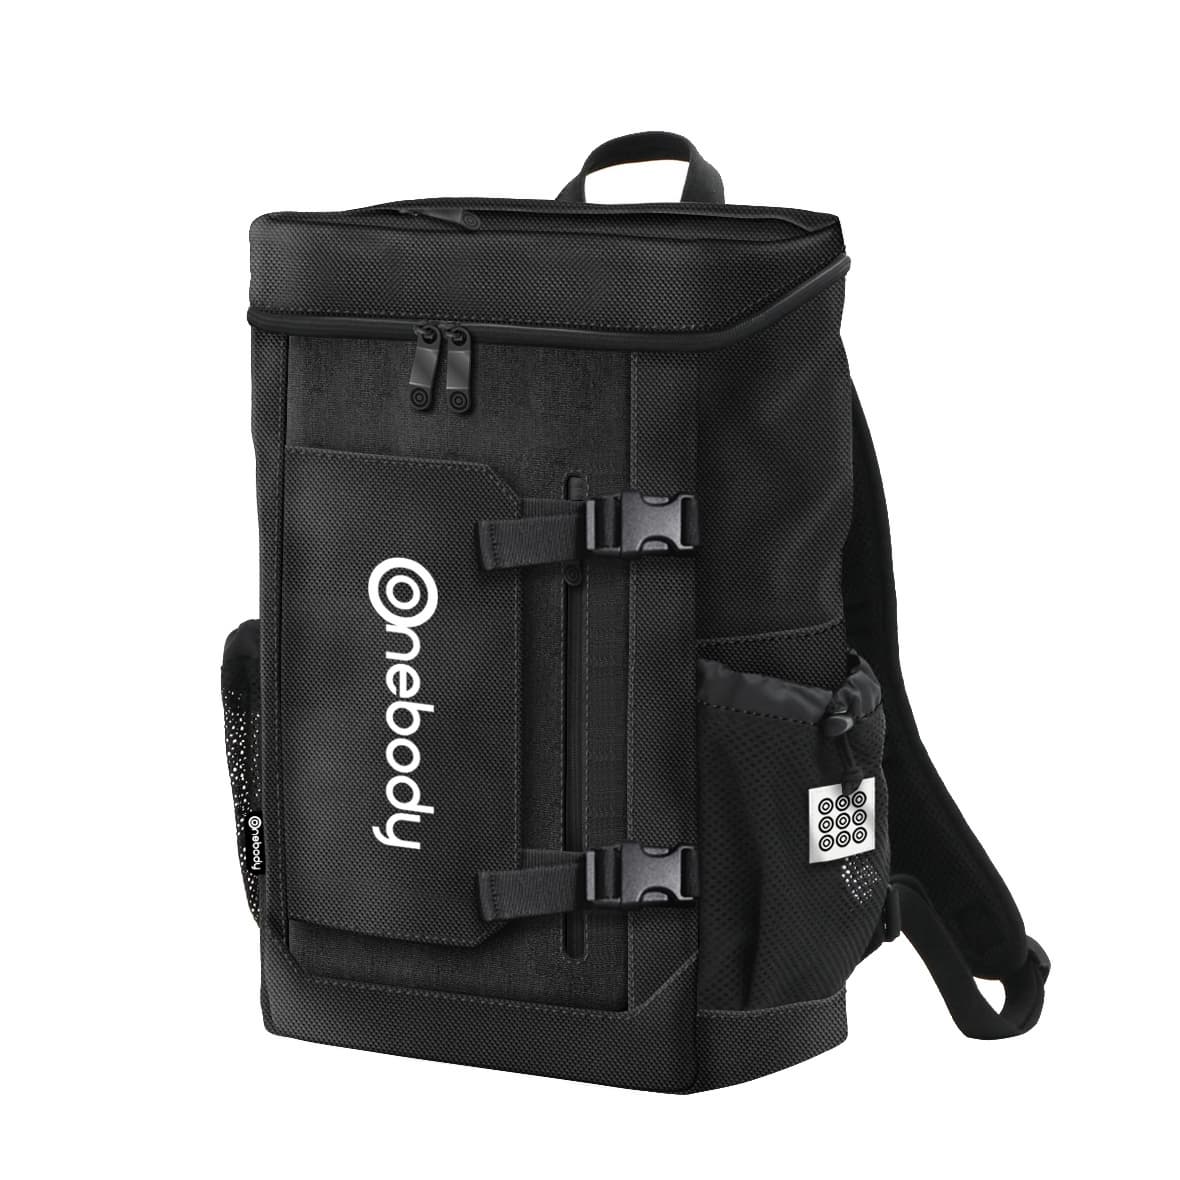 Onebody Laptop Backpack Bag_06 for Travel Business Casual